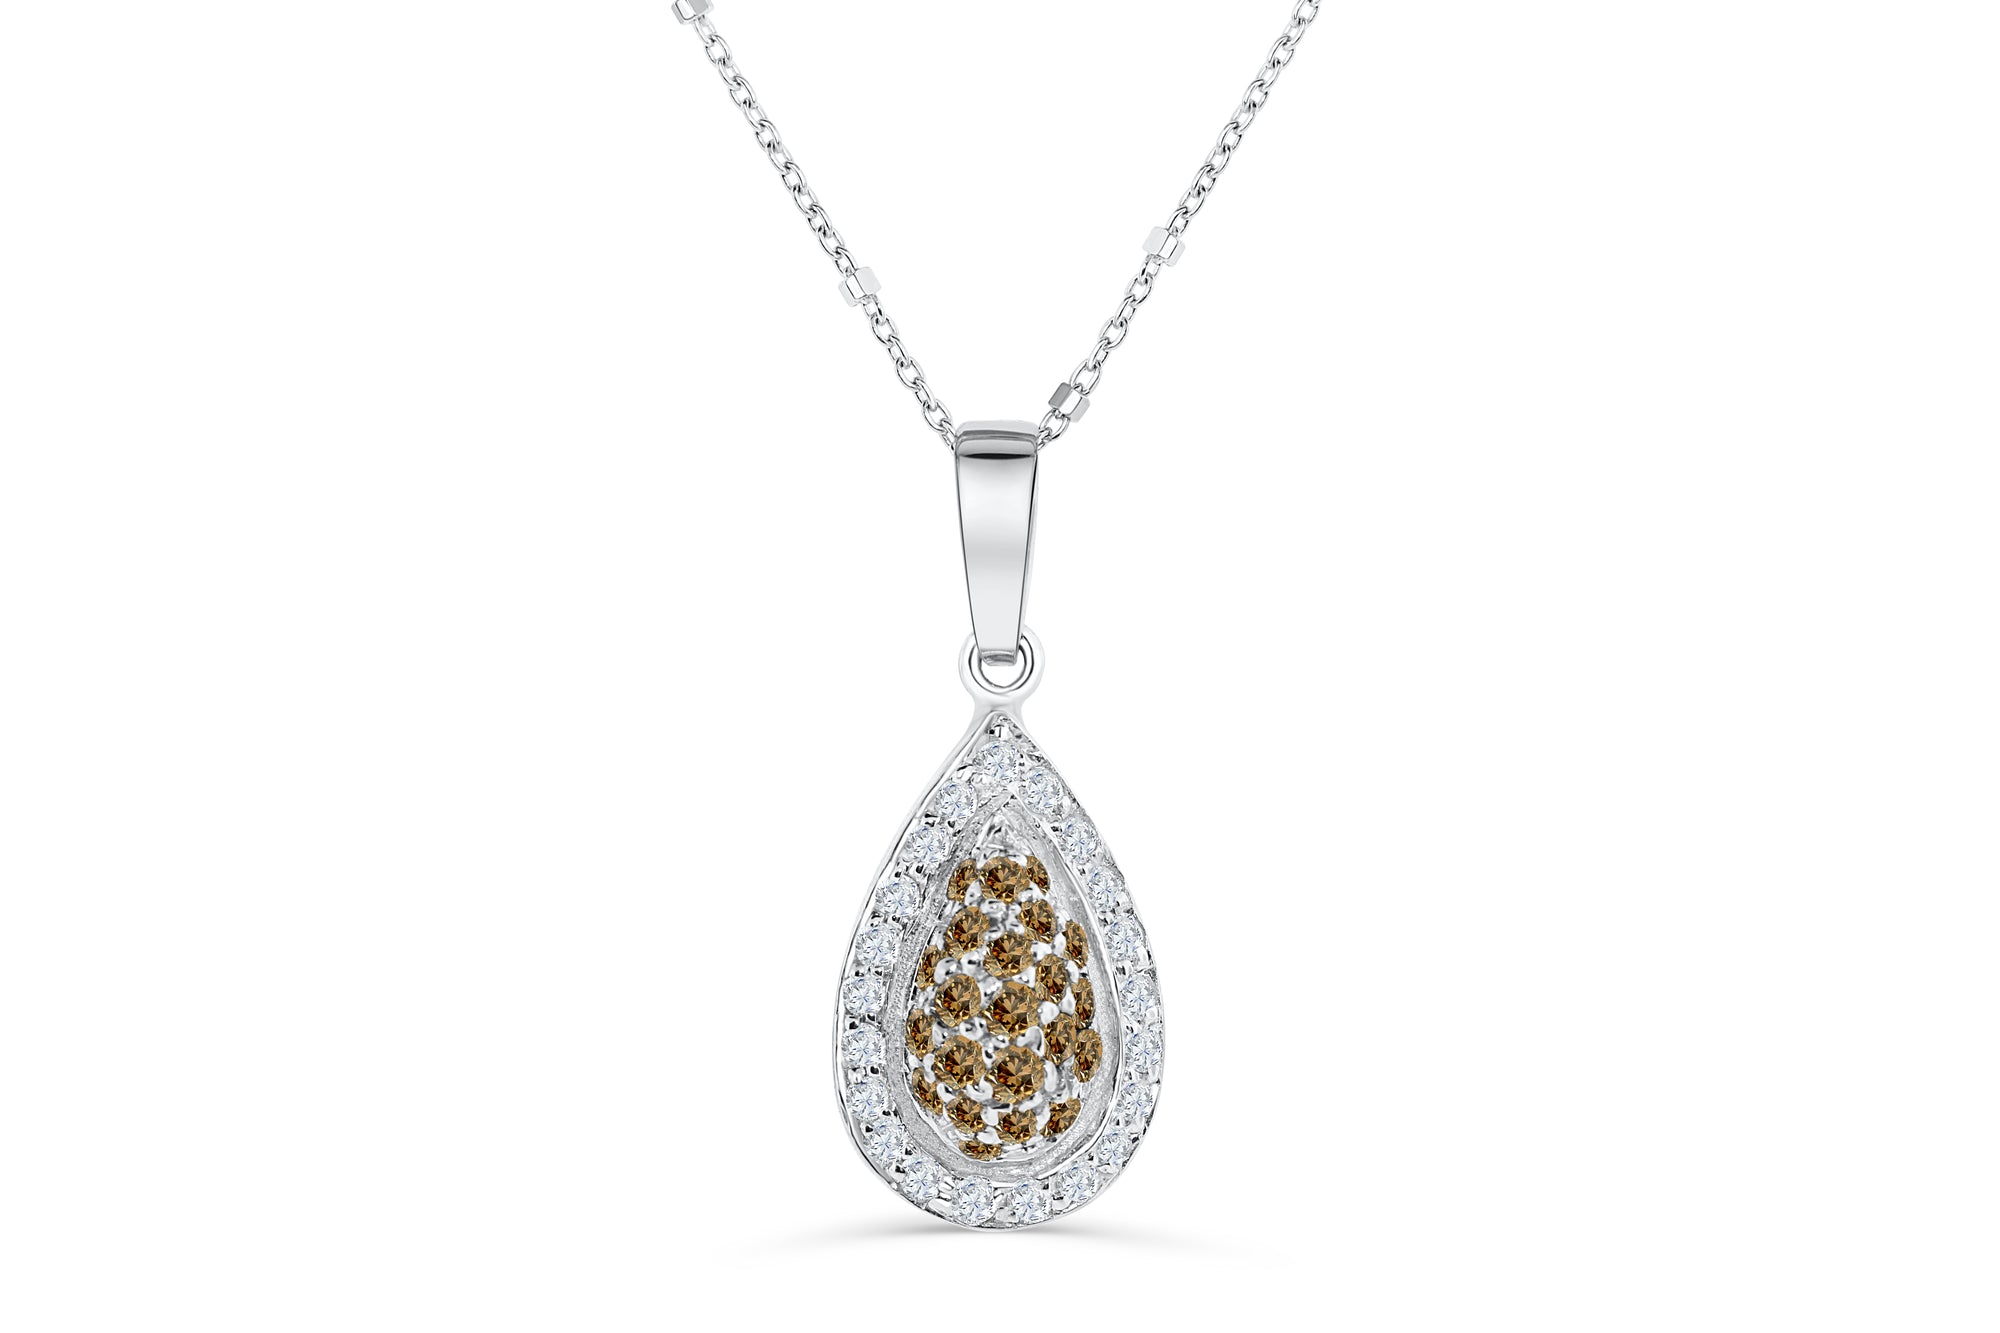 Halo Pave Chocolate Diamond Pendant 0.89 CT TW 14K White Gold DPEN051 - NorthandSouthJewelry